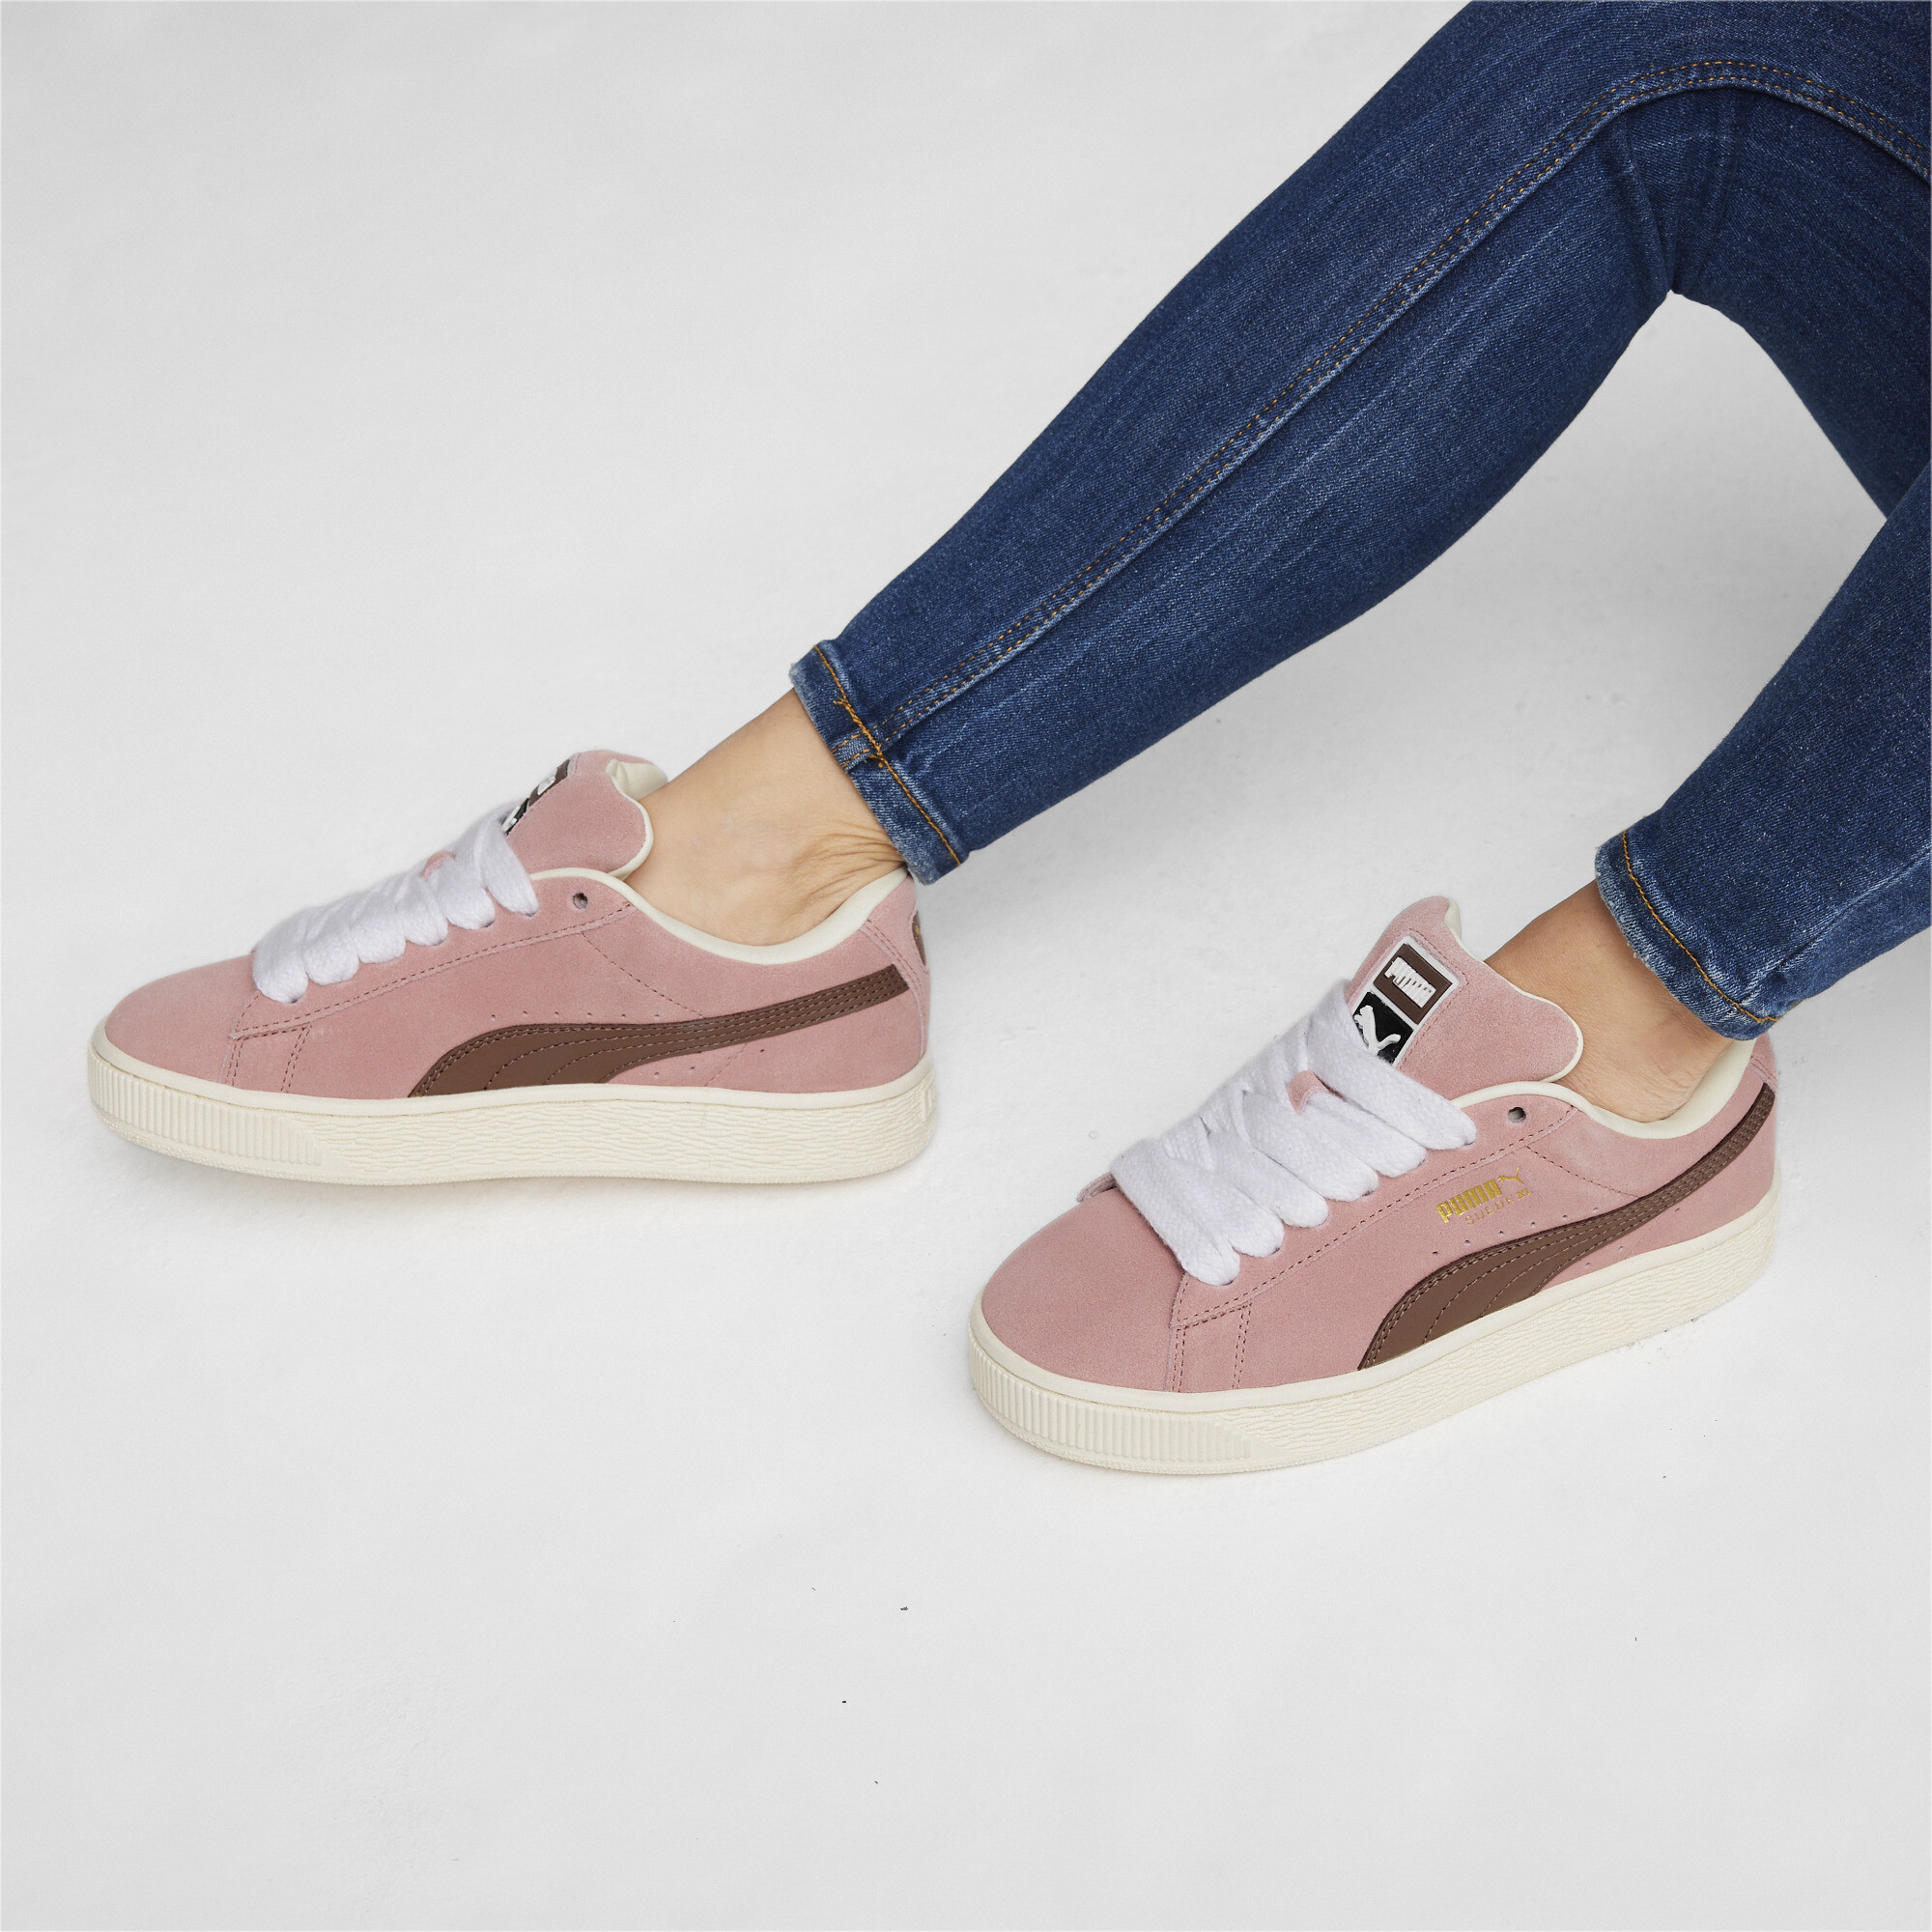 Puma Suede XL Sneakers Unisex, Pink, Size 45, Shoes